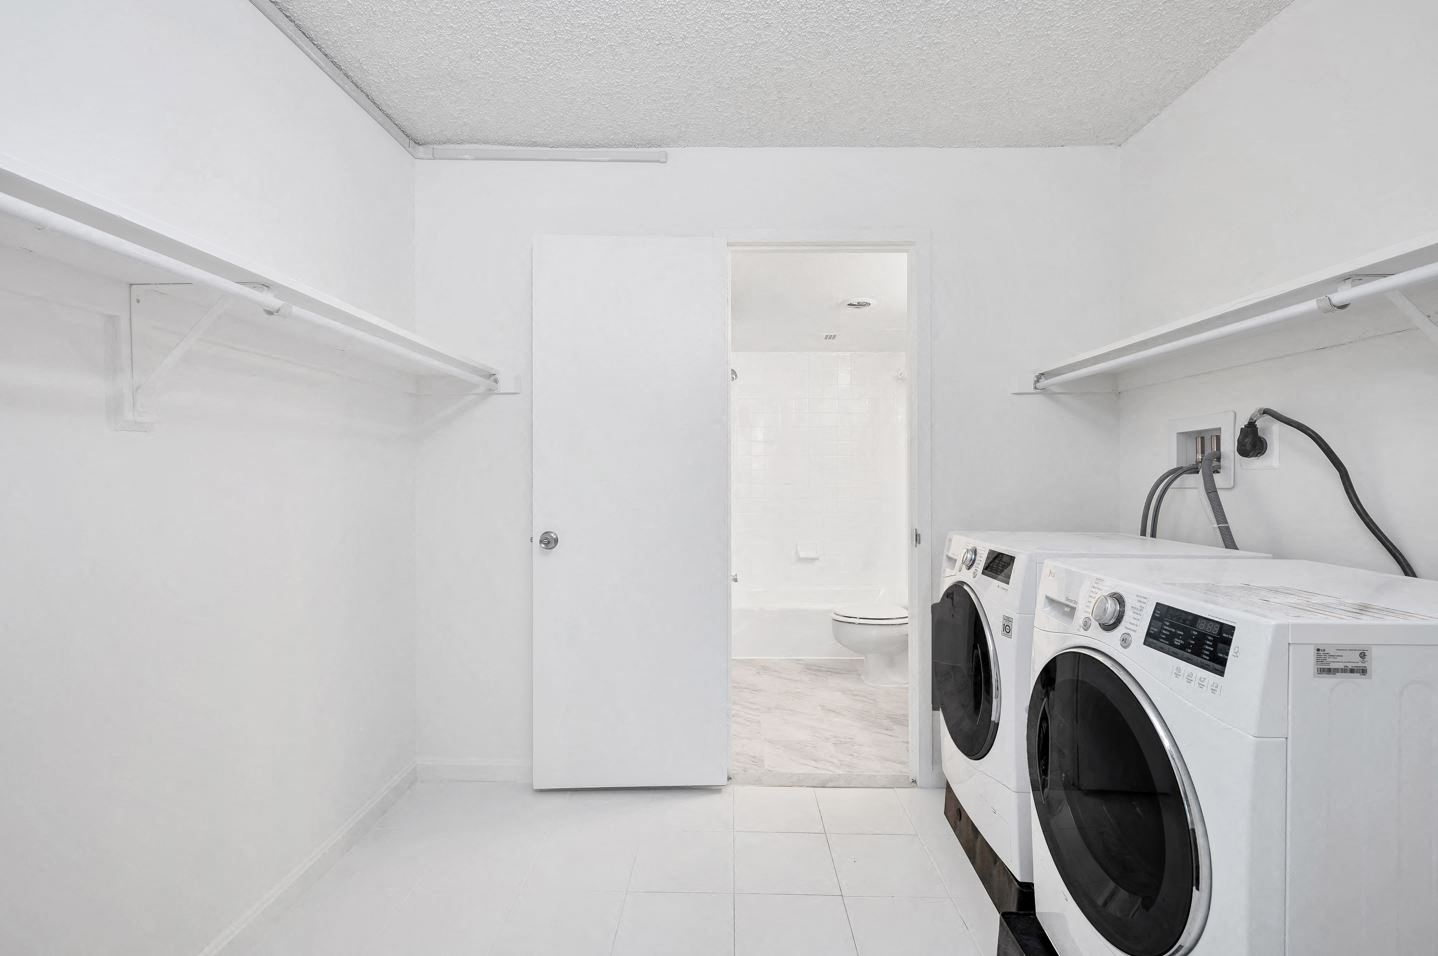 In-home upgrades include full-sized washer and dryer